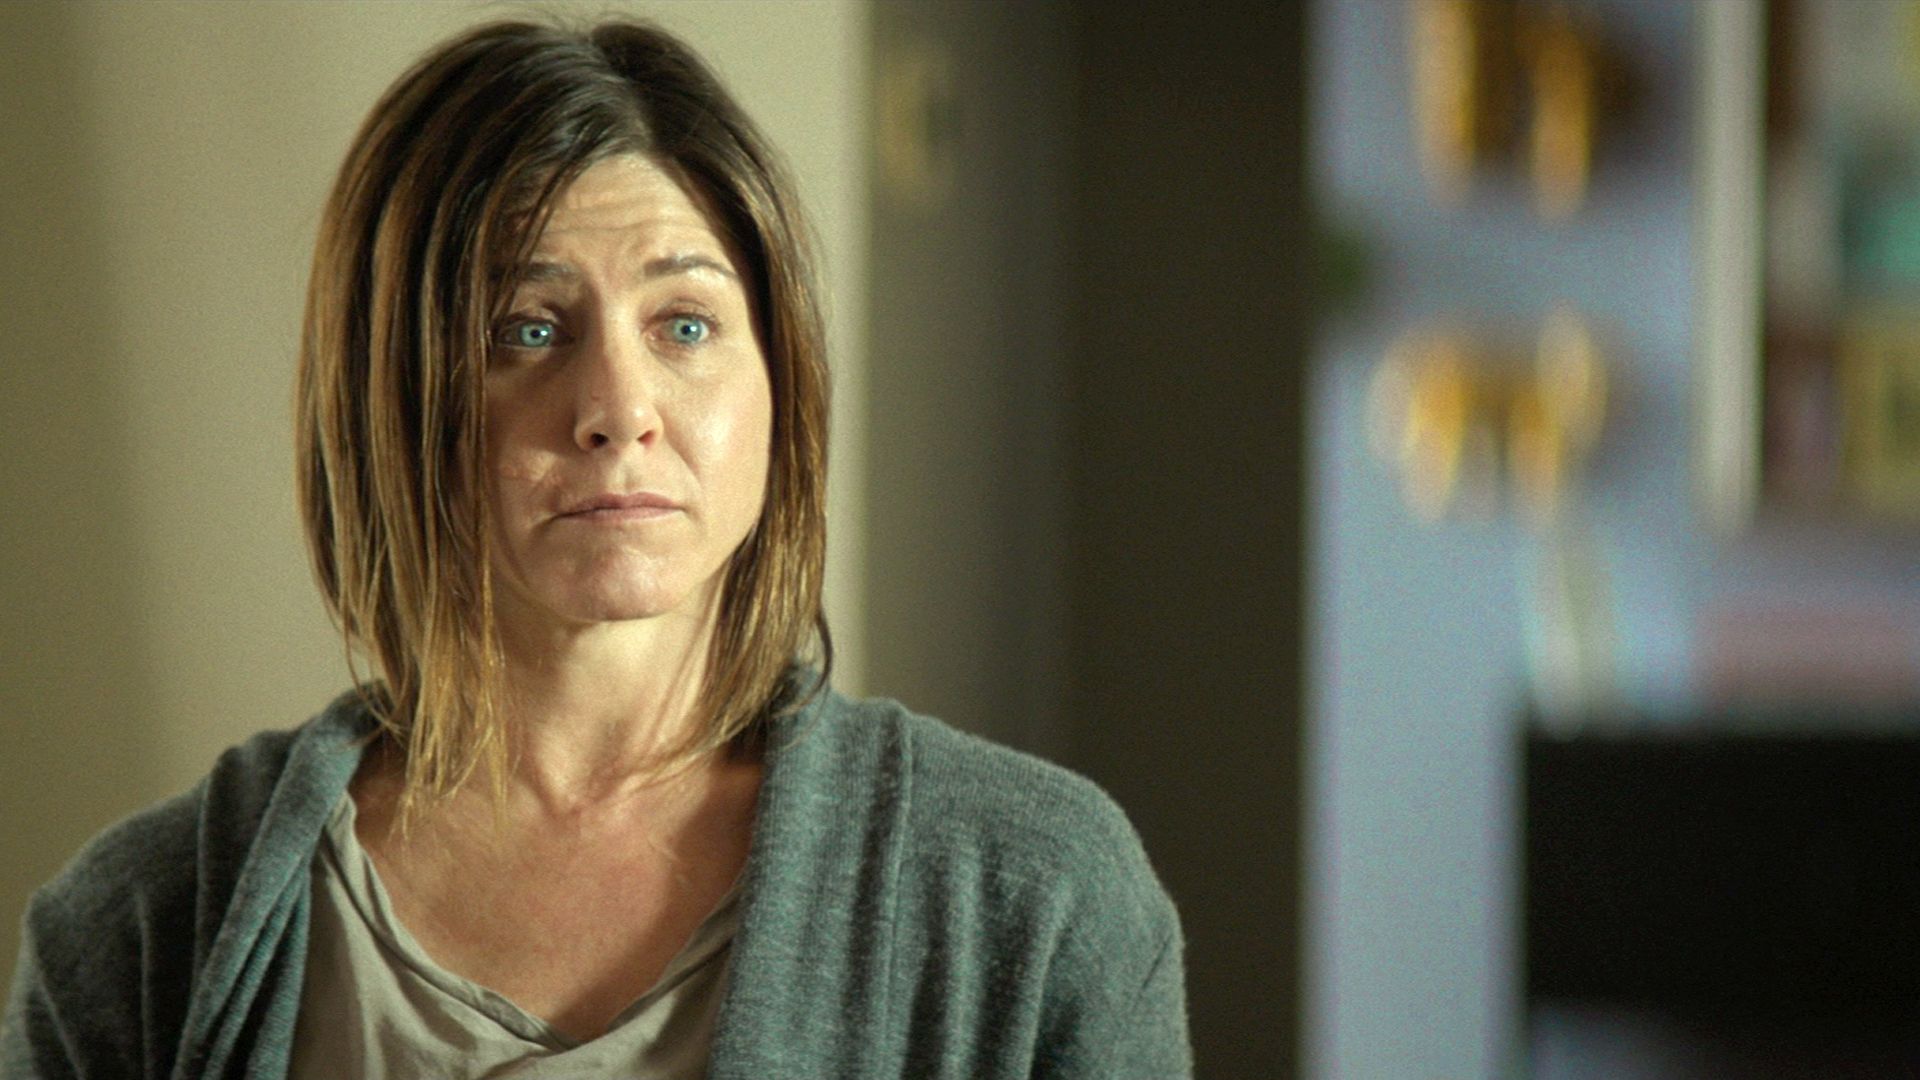 Jennifer Aniston without makeup in 'Cake'